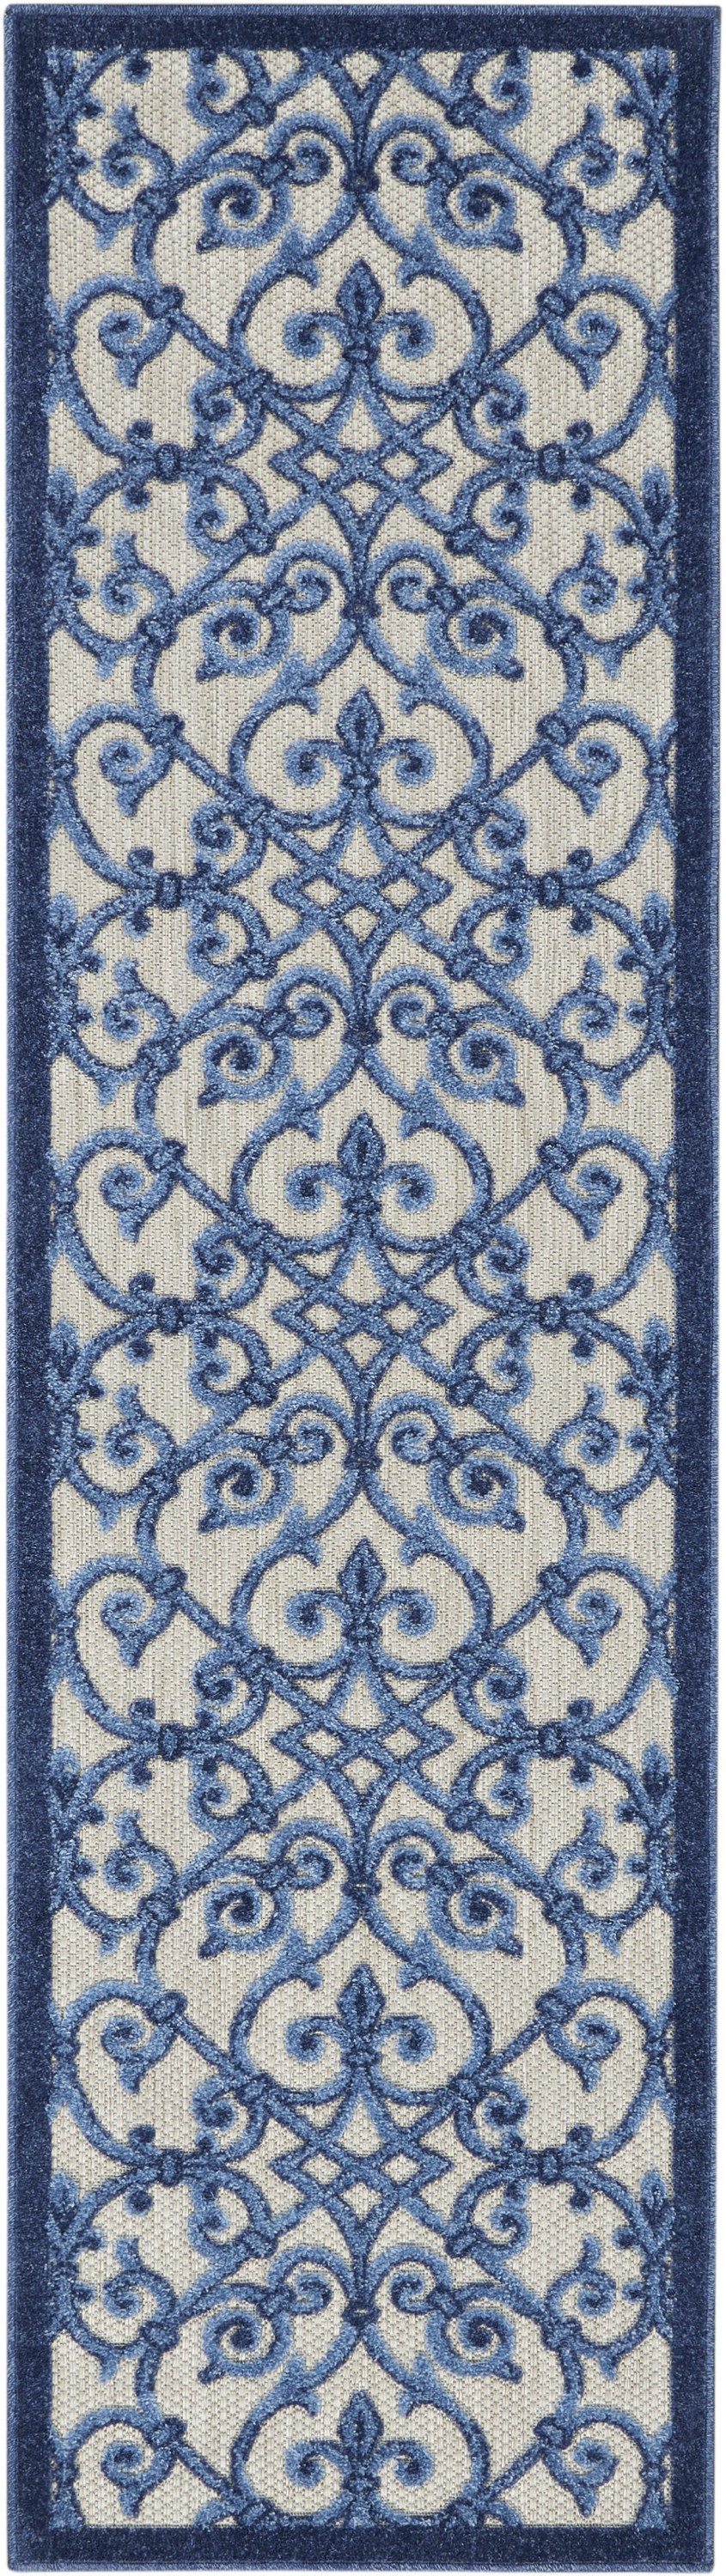 2' X 10' Blue And Gray Floral Indoor Outdoor Area Rug-385005-1